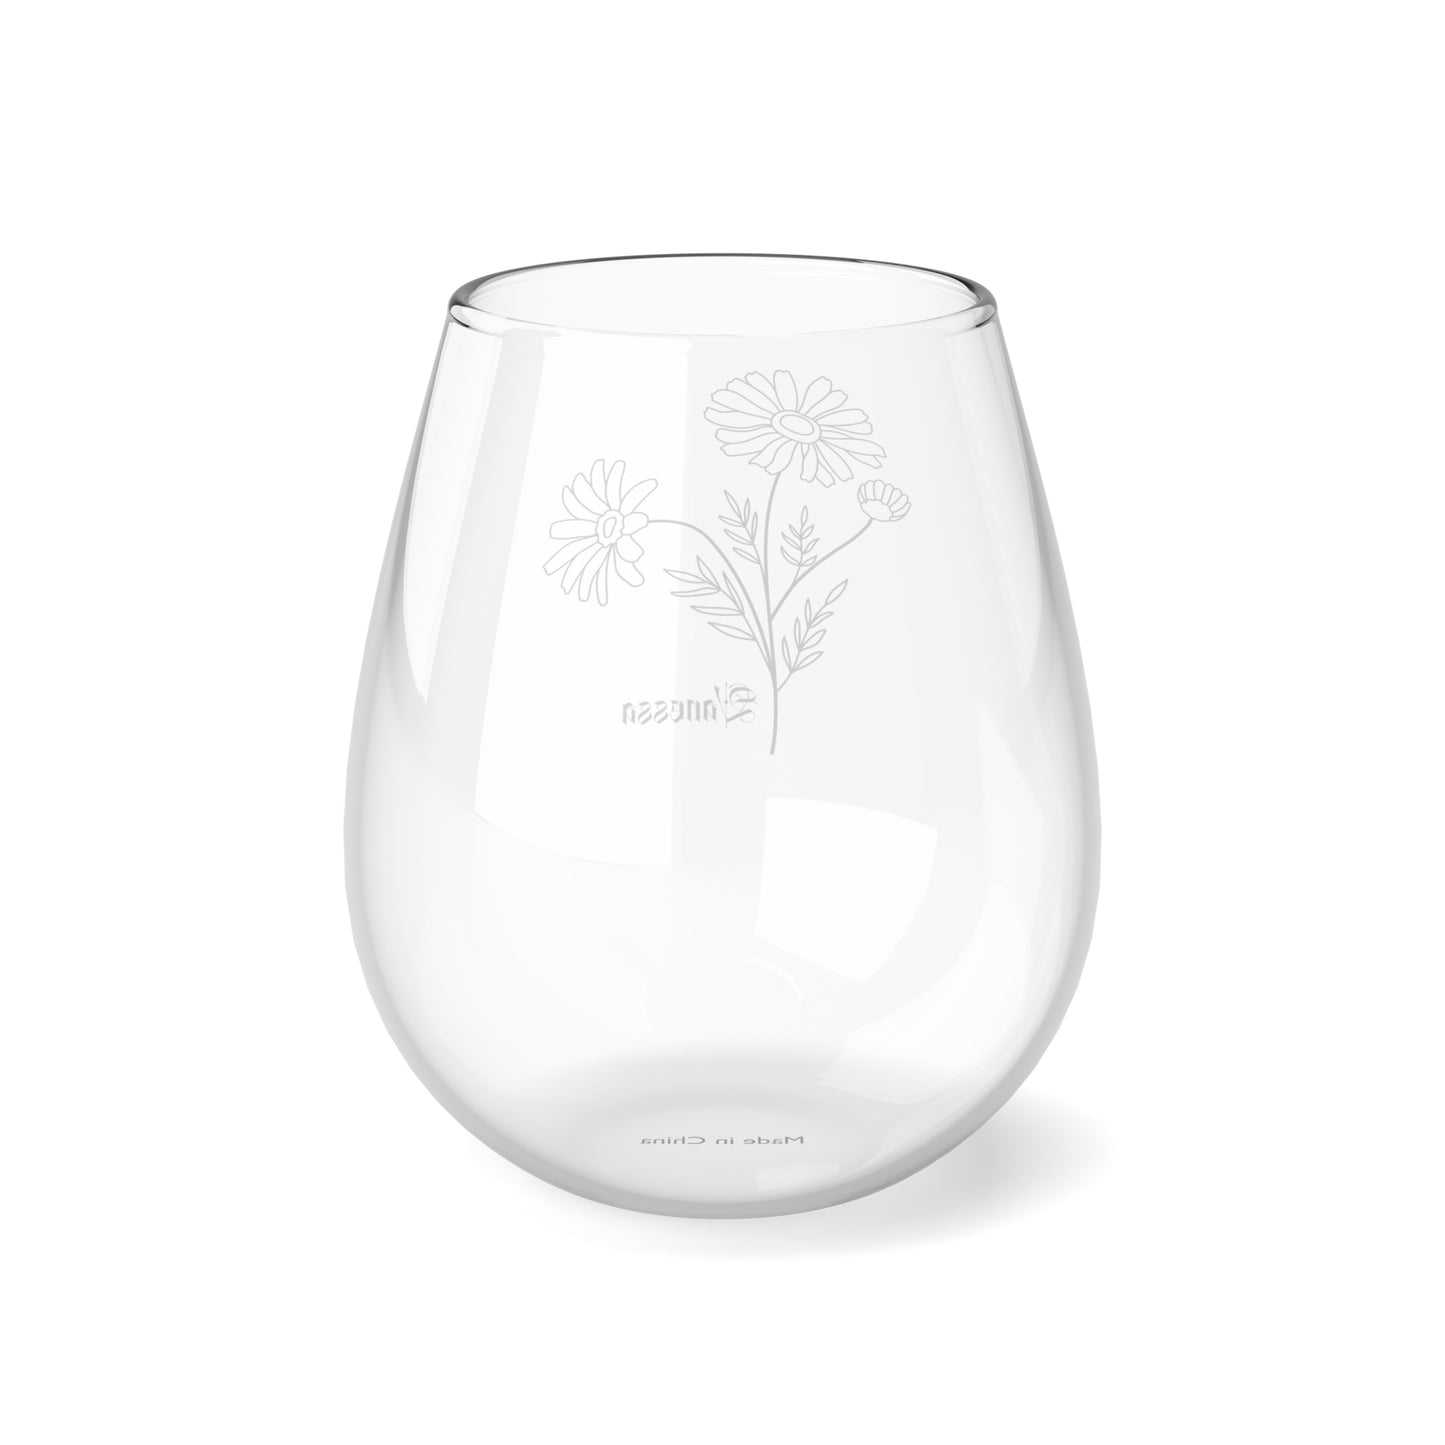 April PERSONALIZED Birth Flower Wine Glass, Birth Flower Gifts, Birth Flower wine glass, Birth Flower Gifts for Women, Gift for coworker, sister gift, birthday gift, Valentine gift, Stemless Wine Glass, 11.75oz